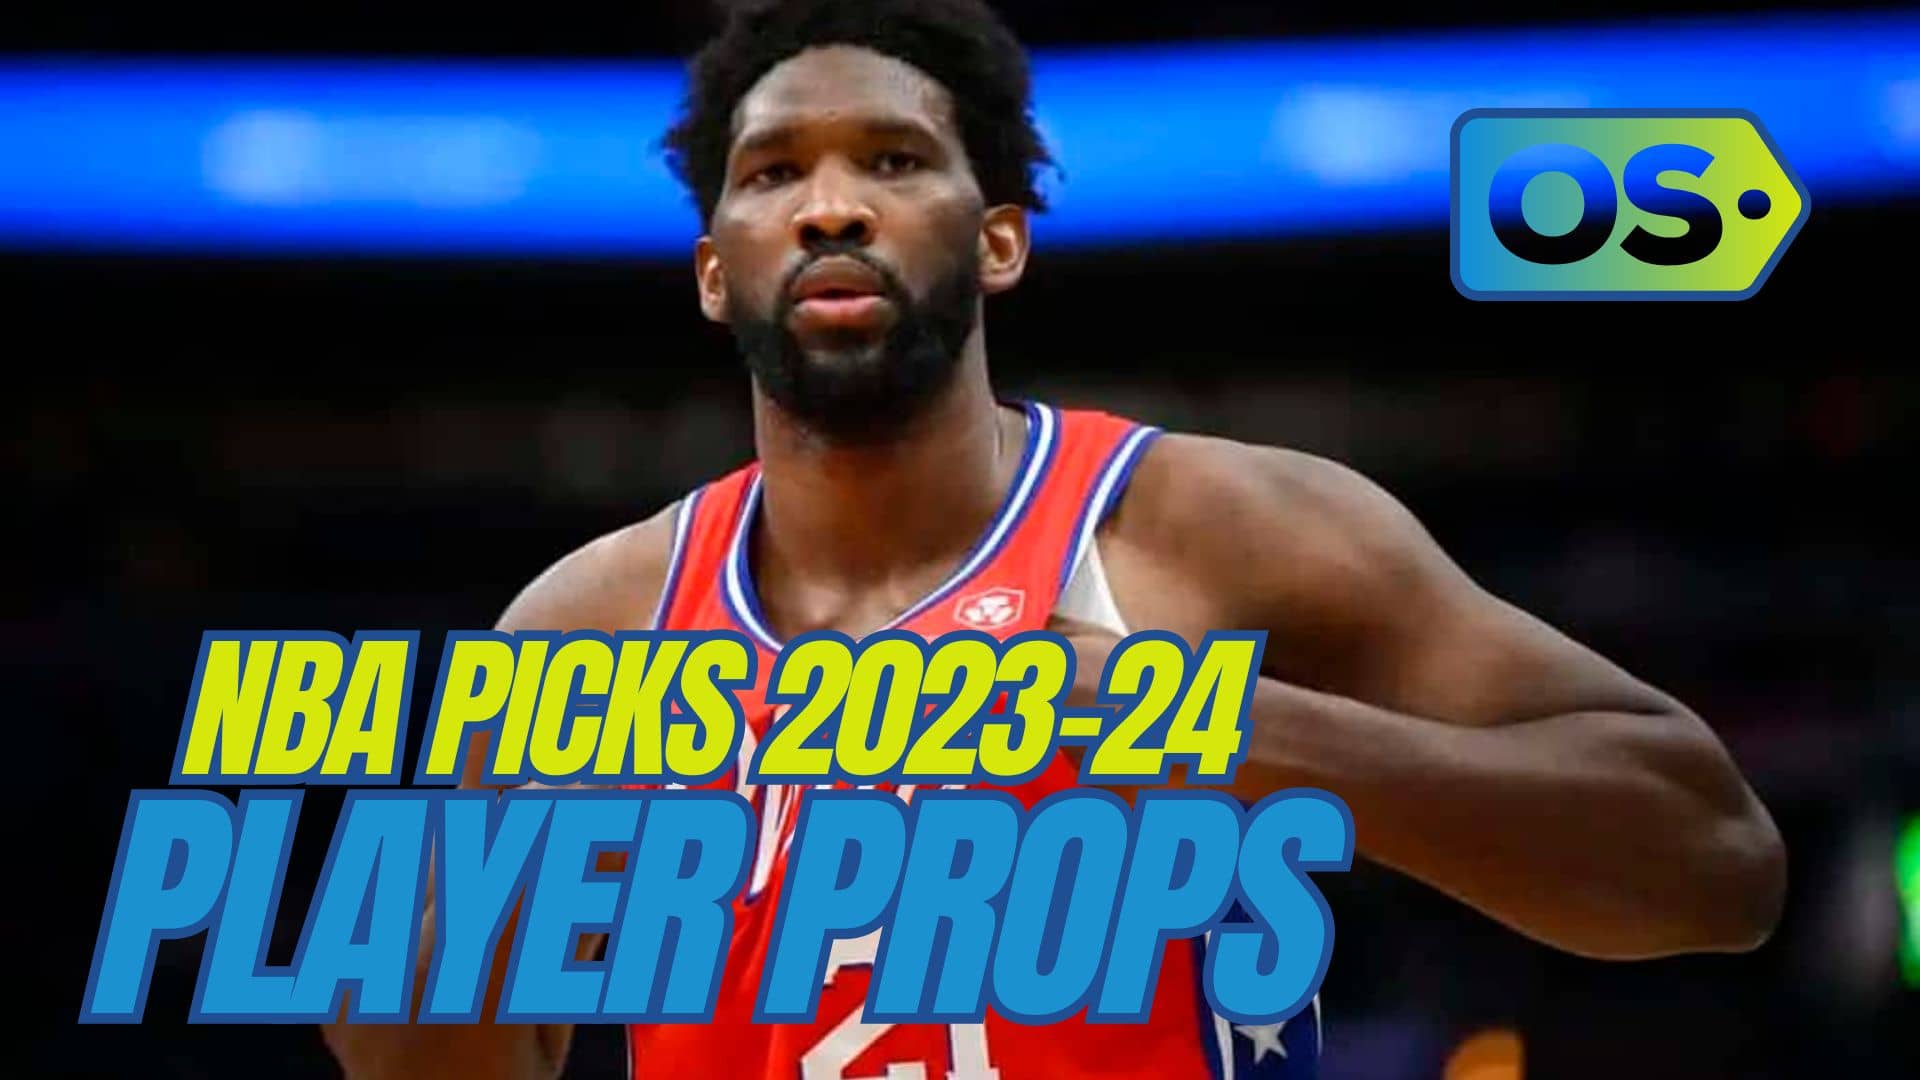 The best NBA player prop bets and picks today for Friday, December 22, include wagers on Joel Embiid and Kyle Lowry.